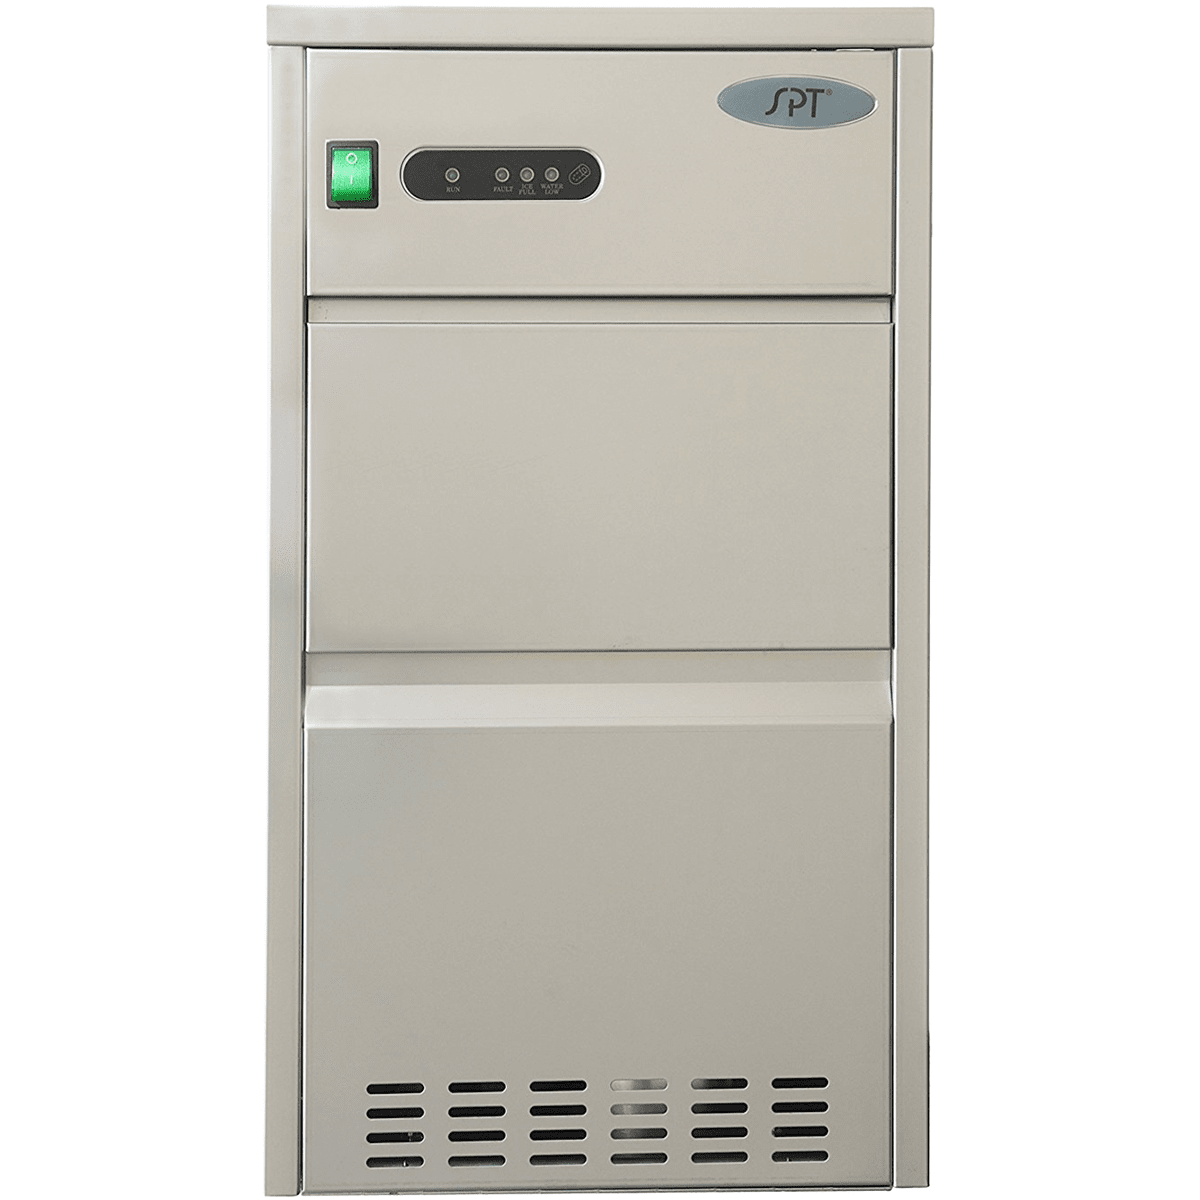 Sunpentown 44 Lb. Automatic Stainless Steel Ice Maker (im-441c)